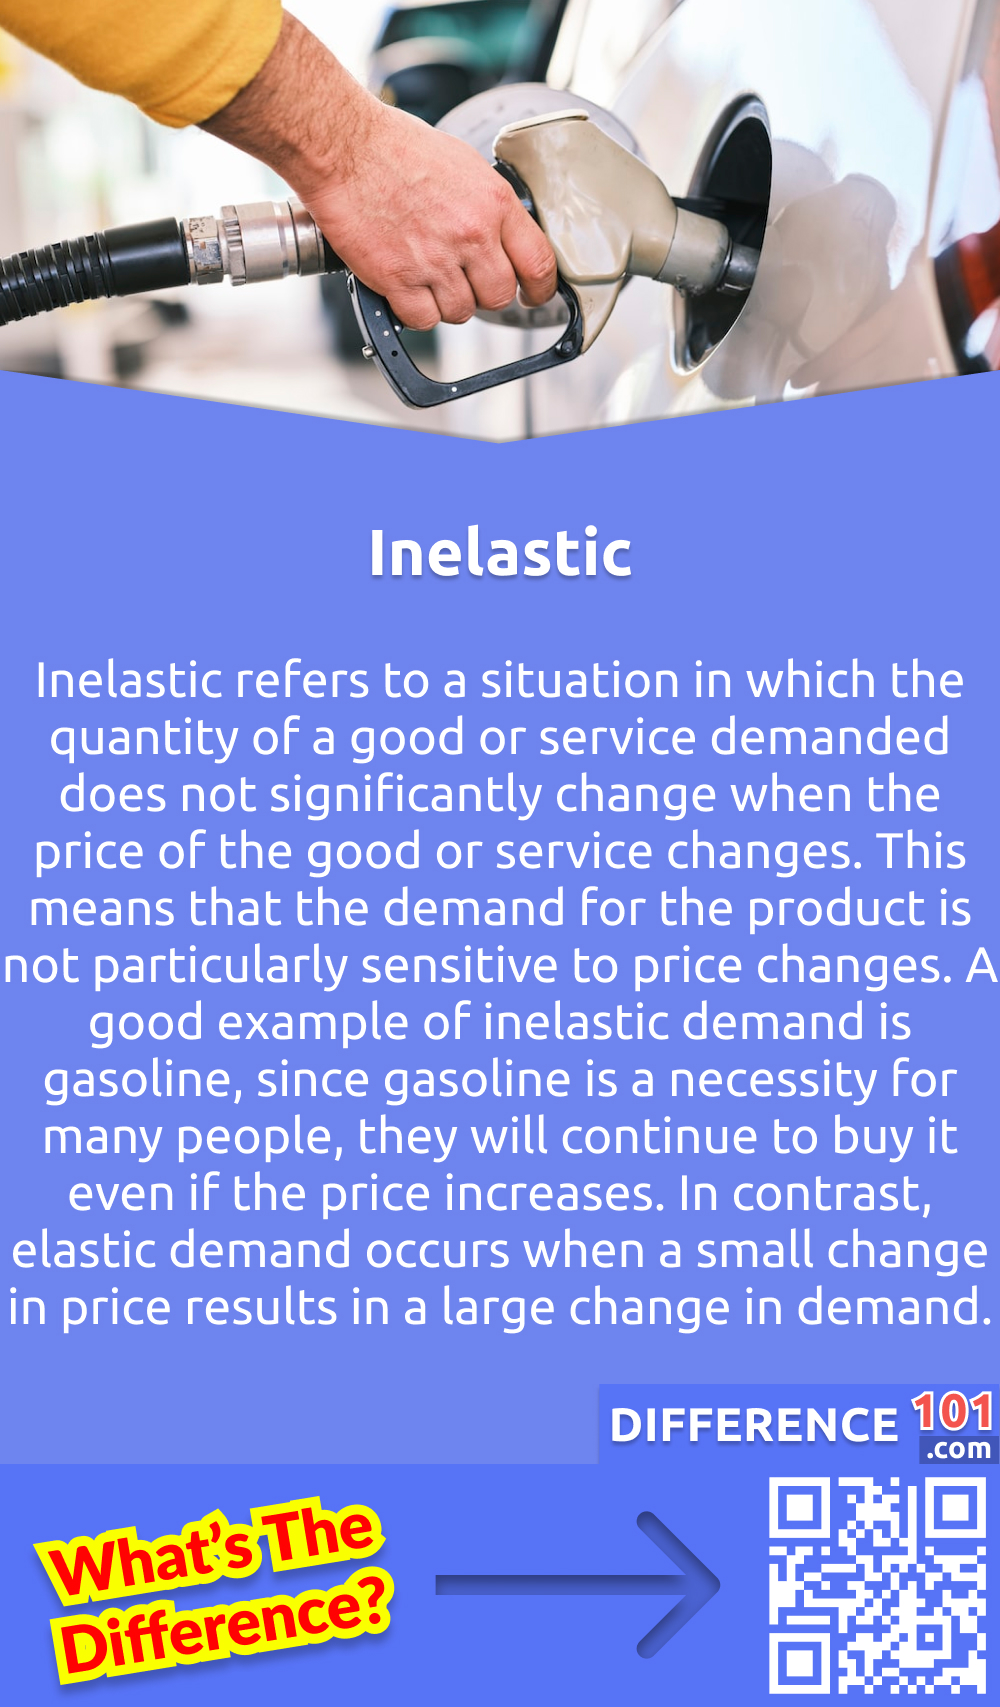 What Is Inelastic? Inelastic refers to a situation in which the quantity of a good or service demanded does not significantly change when the price of the good or service changes. This means that the demand for the product is not particularly sensitive to price changes. A good example of inelastic demand is gasoline, since gasoline is a necessity for many people, they will continue to buy it even if the price increases. In contrast, elastic demand occurs when a small change in price results in a large change in demand. Generally, elasticity of demand is greater for goods that are considered luxuries or where there are many substitutes available. Understanding whether demand for a certain good is elastic or inelastic is important for businesses as it can help them to set optimal prices for their products.